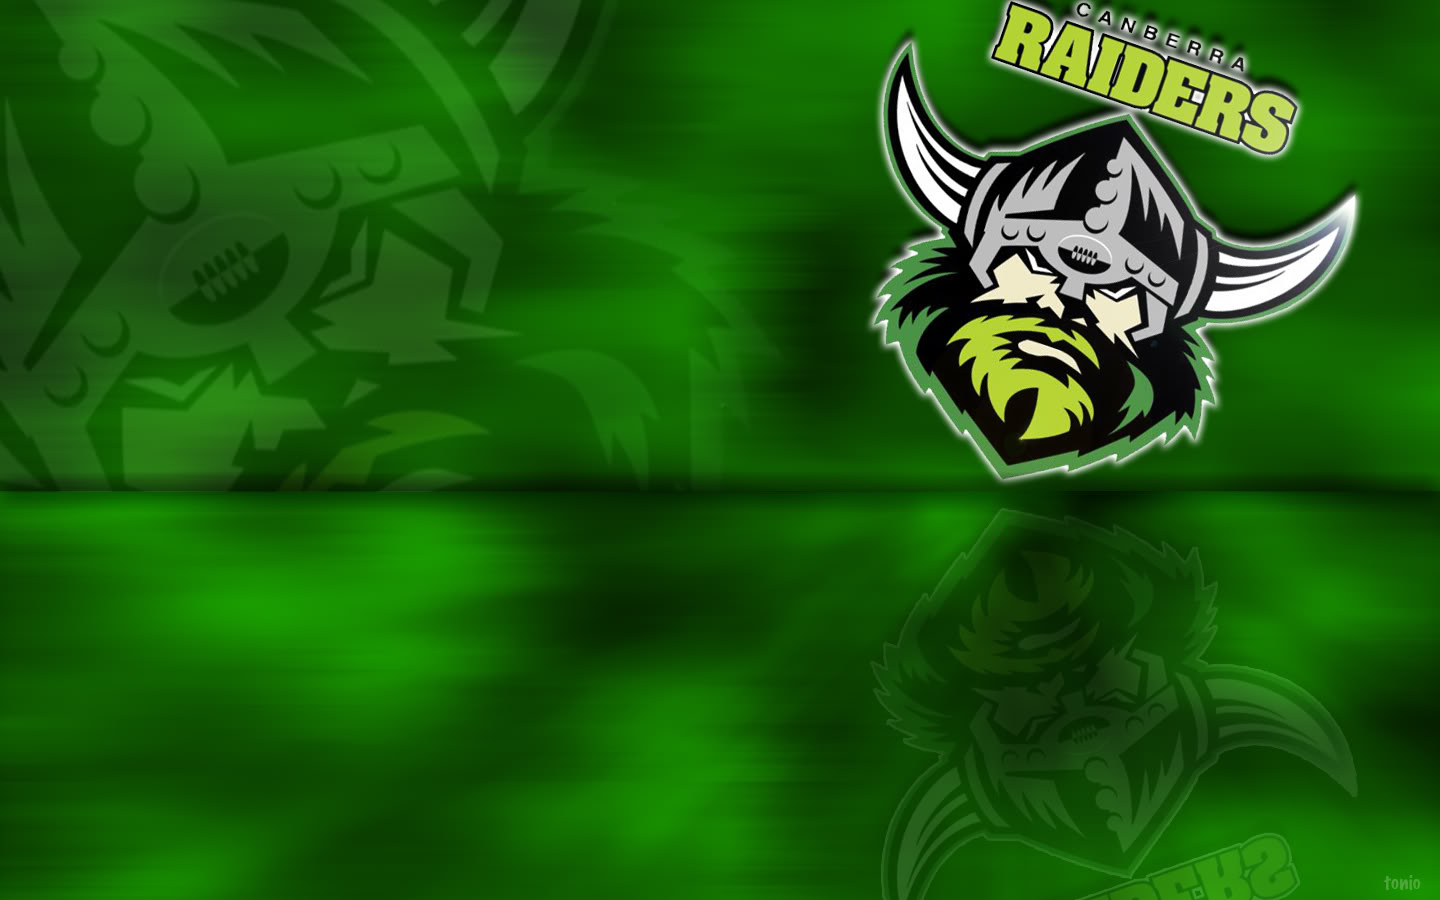 Canberra Raiders Facebook Covers - HD Wallpaper 